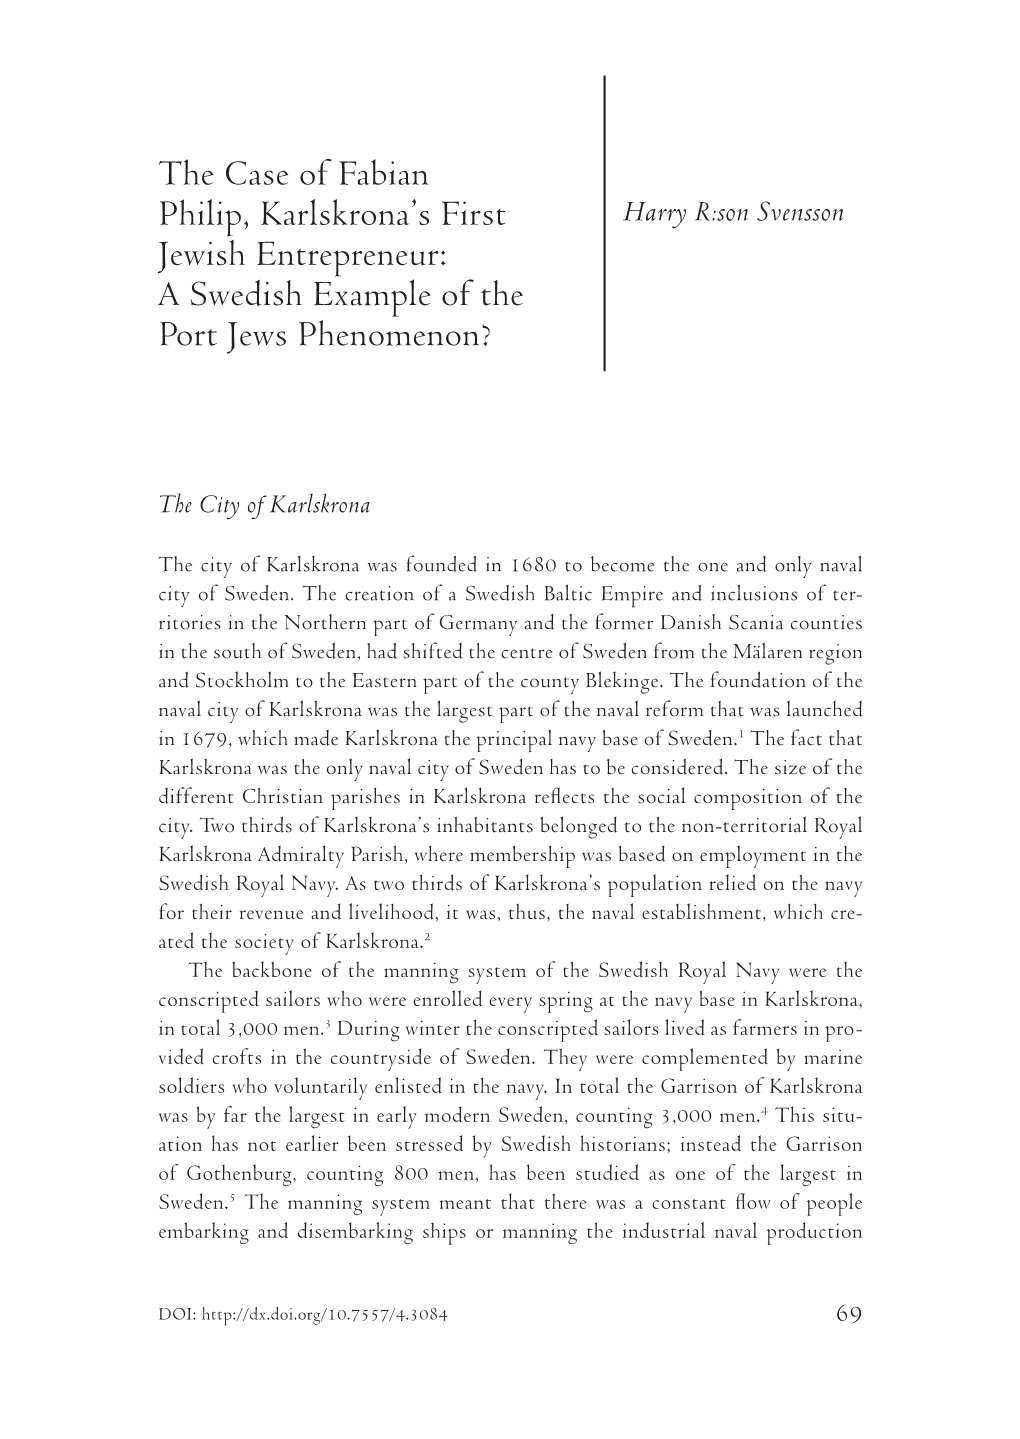 The Case of Fabian Philip, Karlskrona's First Jewish